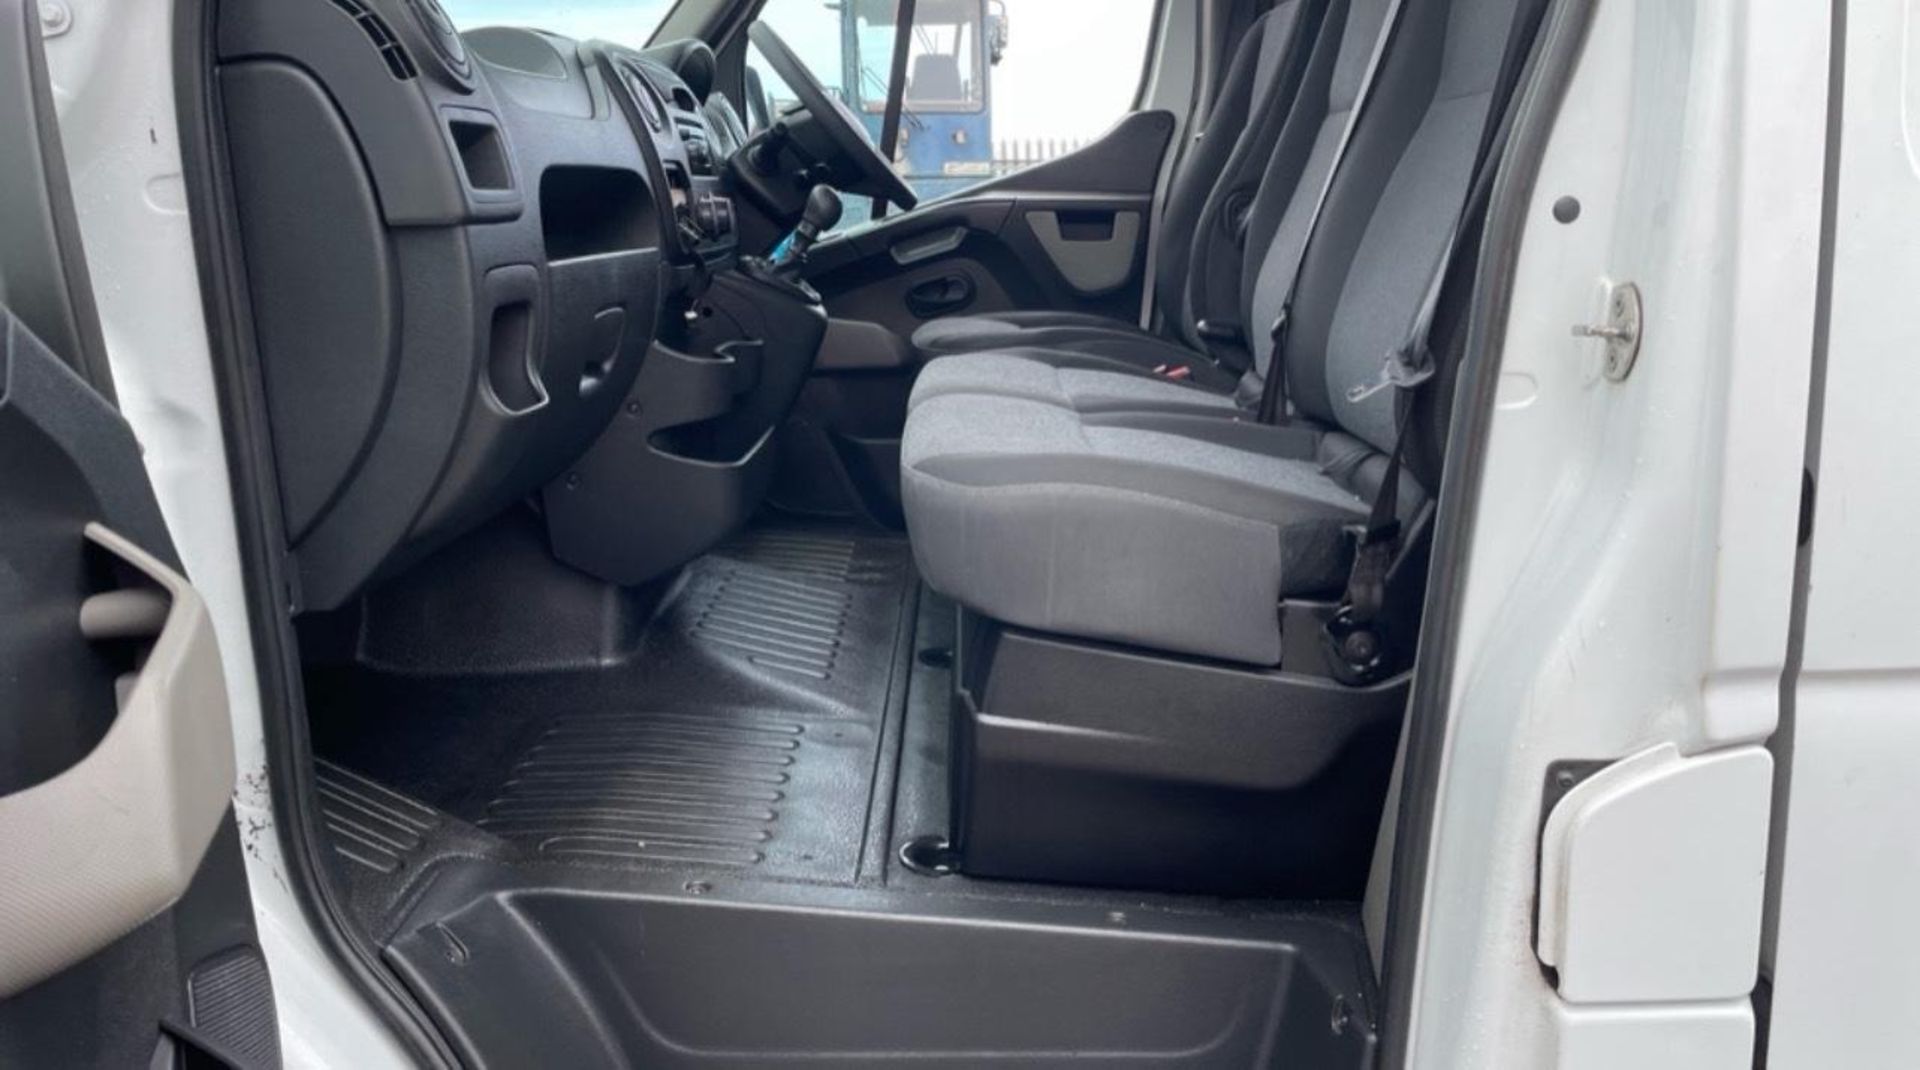 2019 RENAULT MASTER- 207K MILES- HPI CLEAR - READY TO GO! - Image 10 of 11